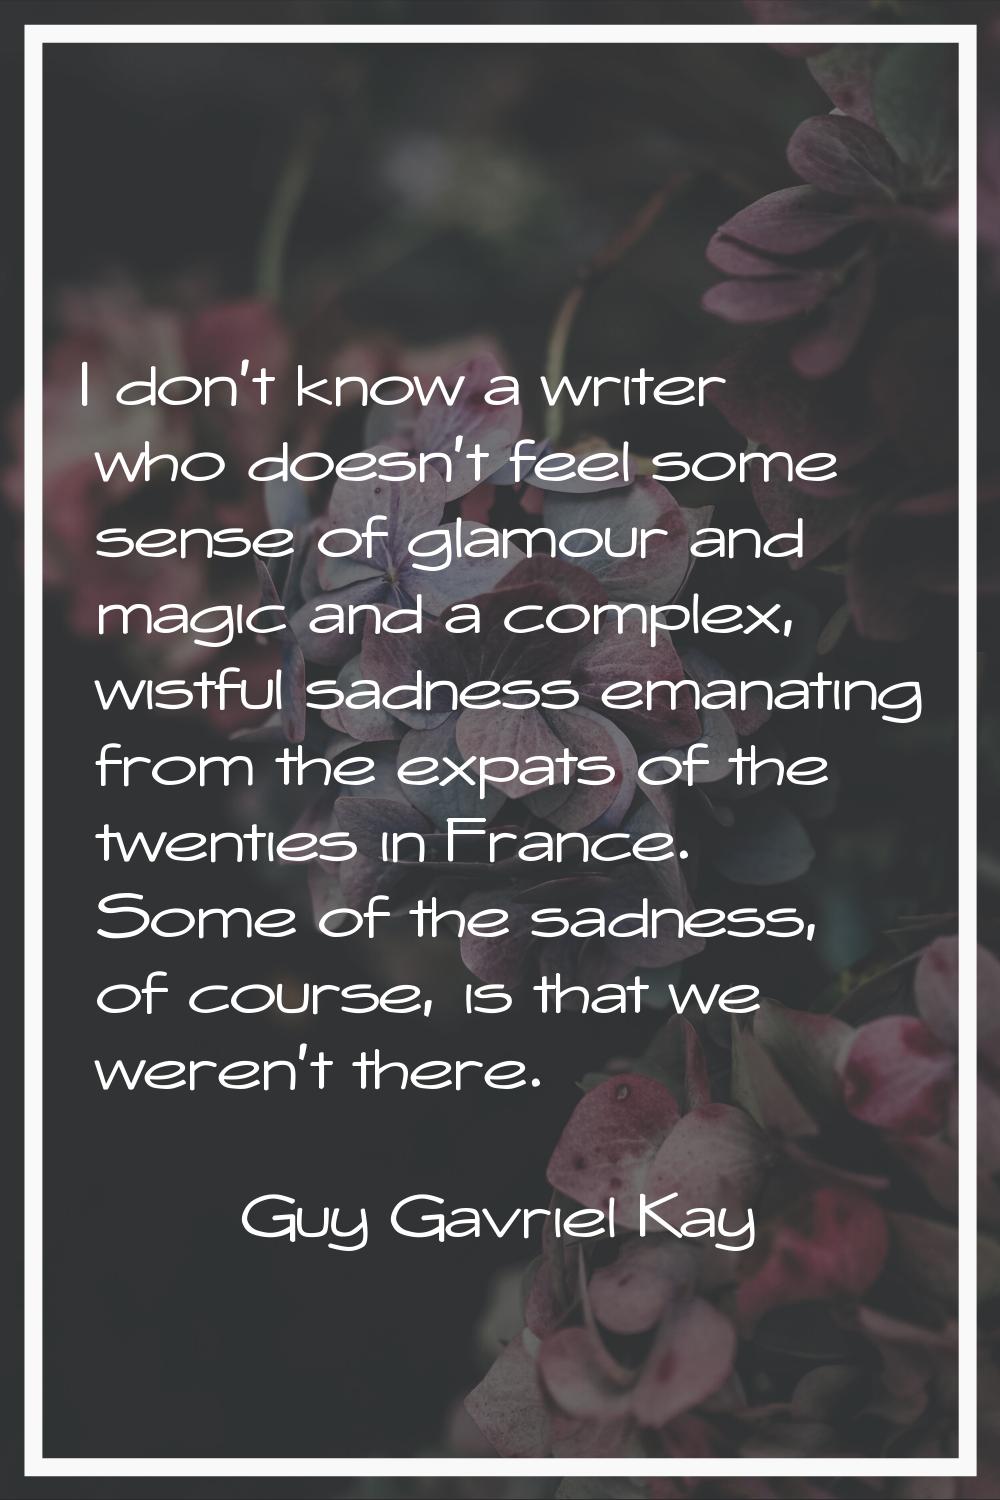 I don't know a writer who doesn't feel some sense of glamour and magic and a complex, wistful sadne